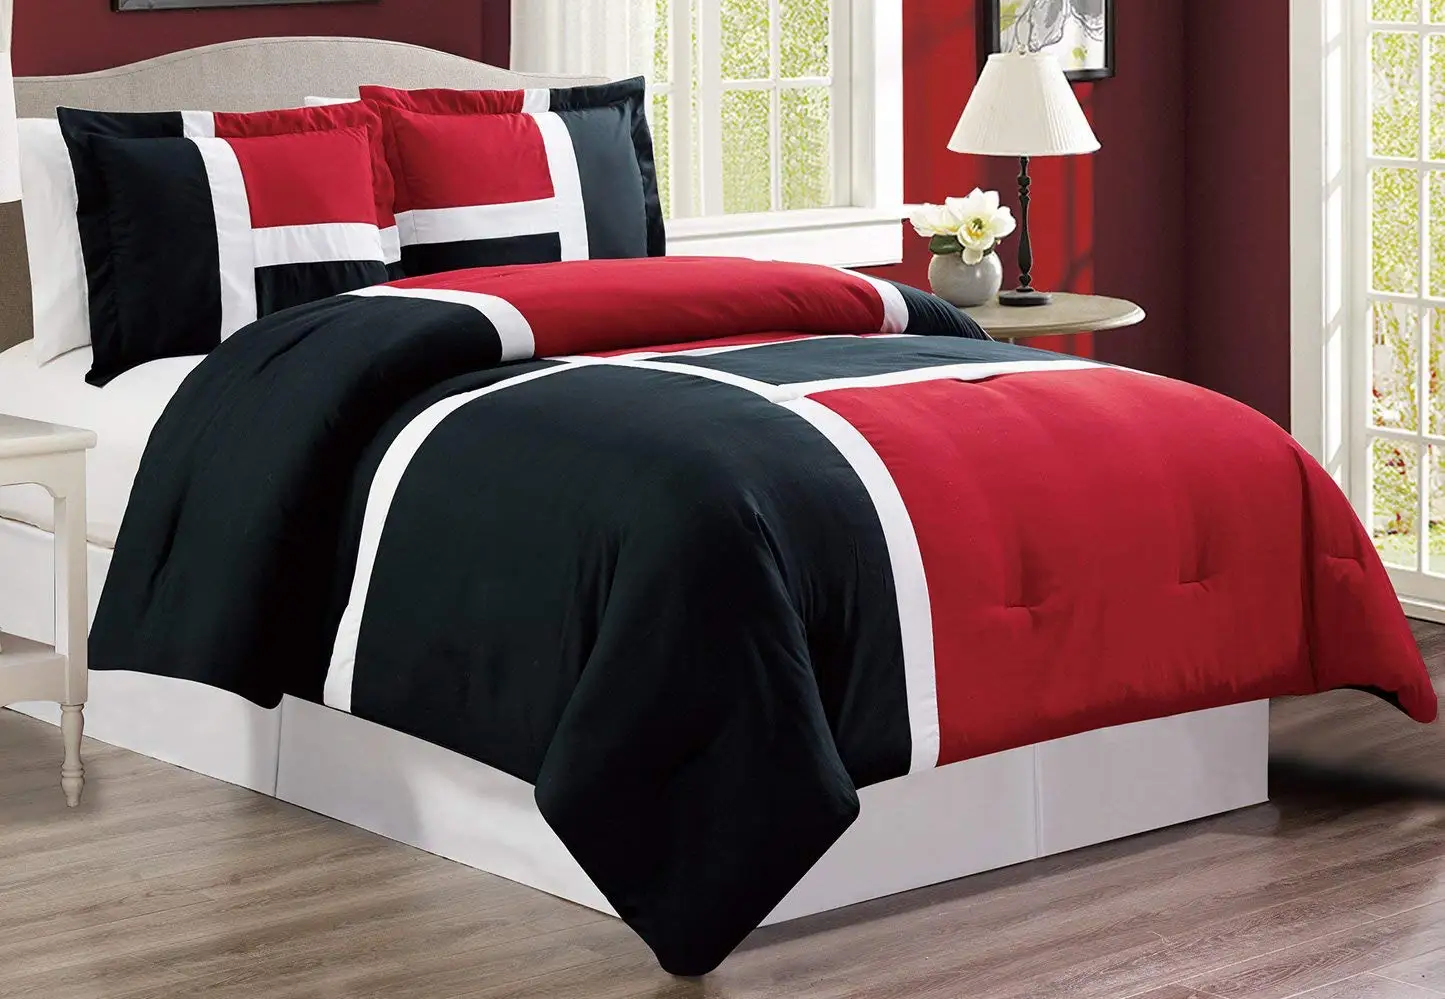 Cheap Red Black And White Comforter Find Red Black And White